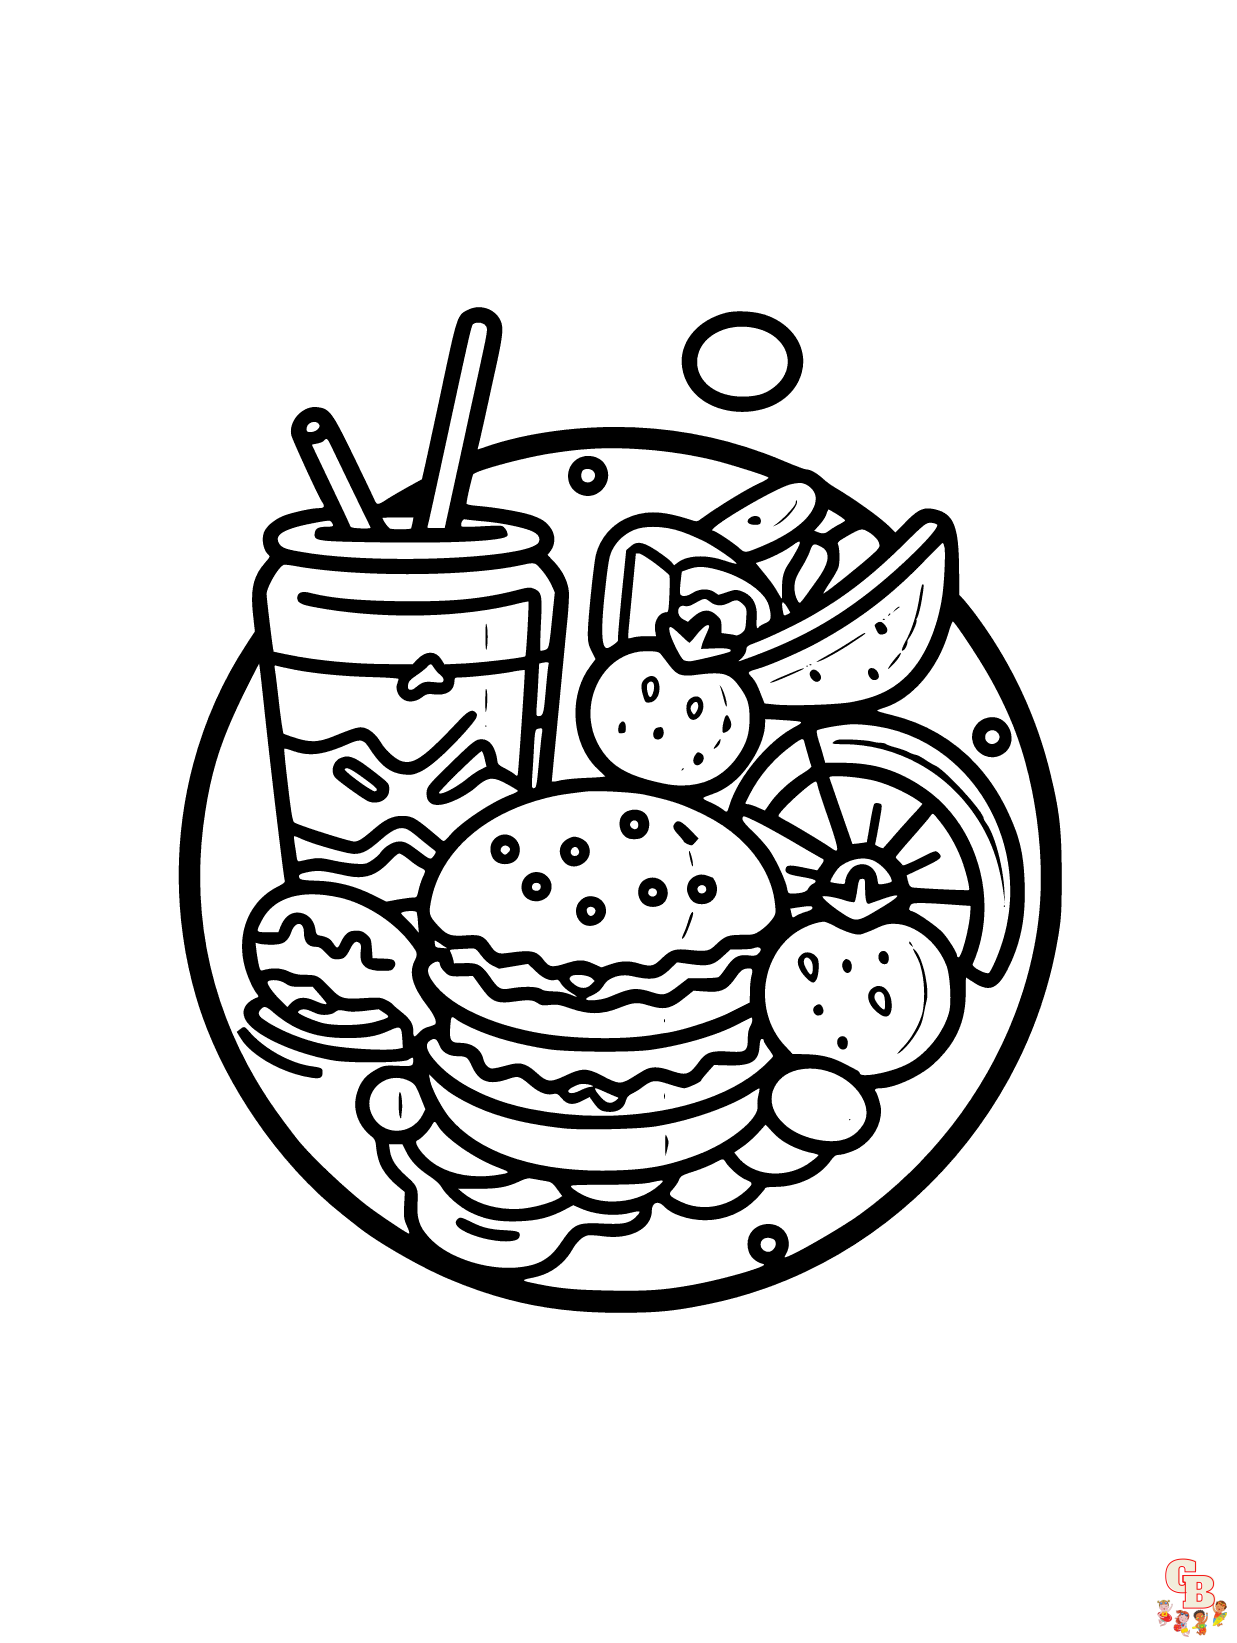 Food coloring pages easy